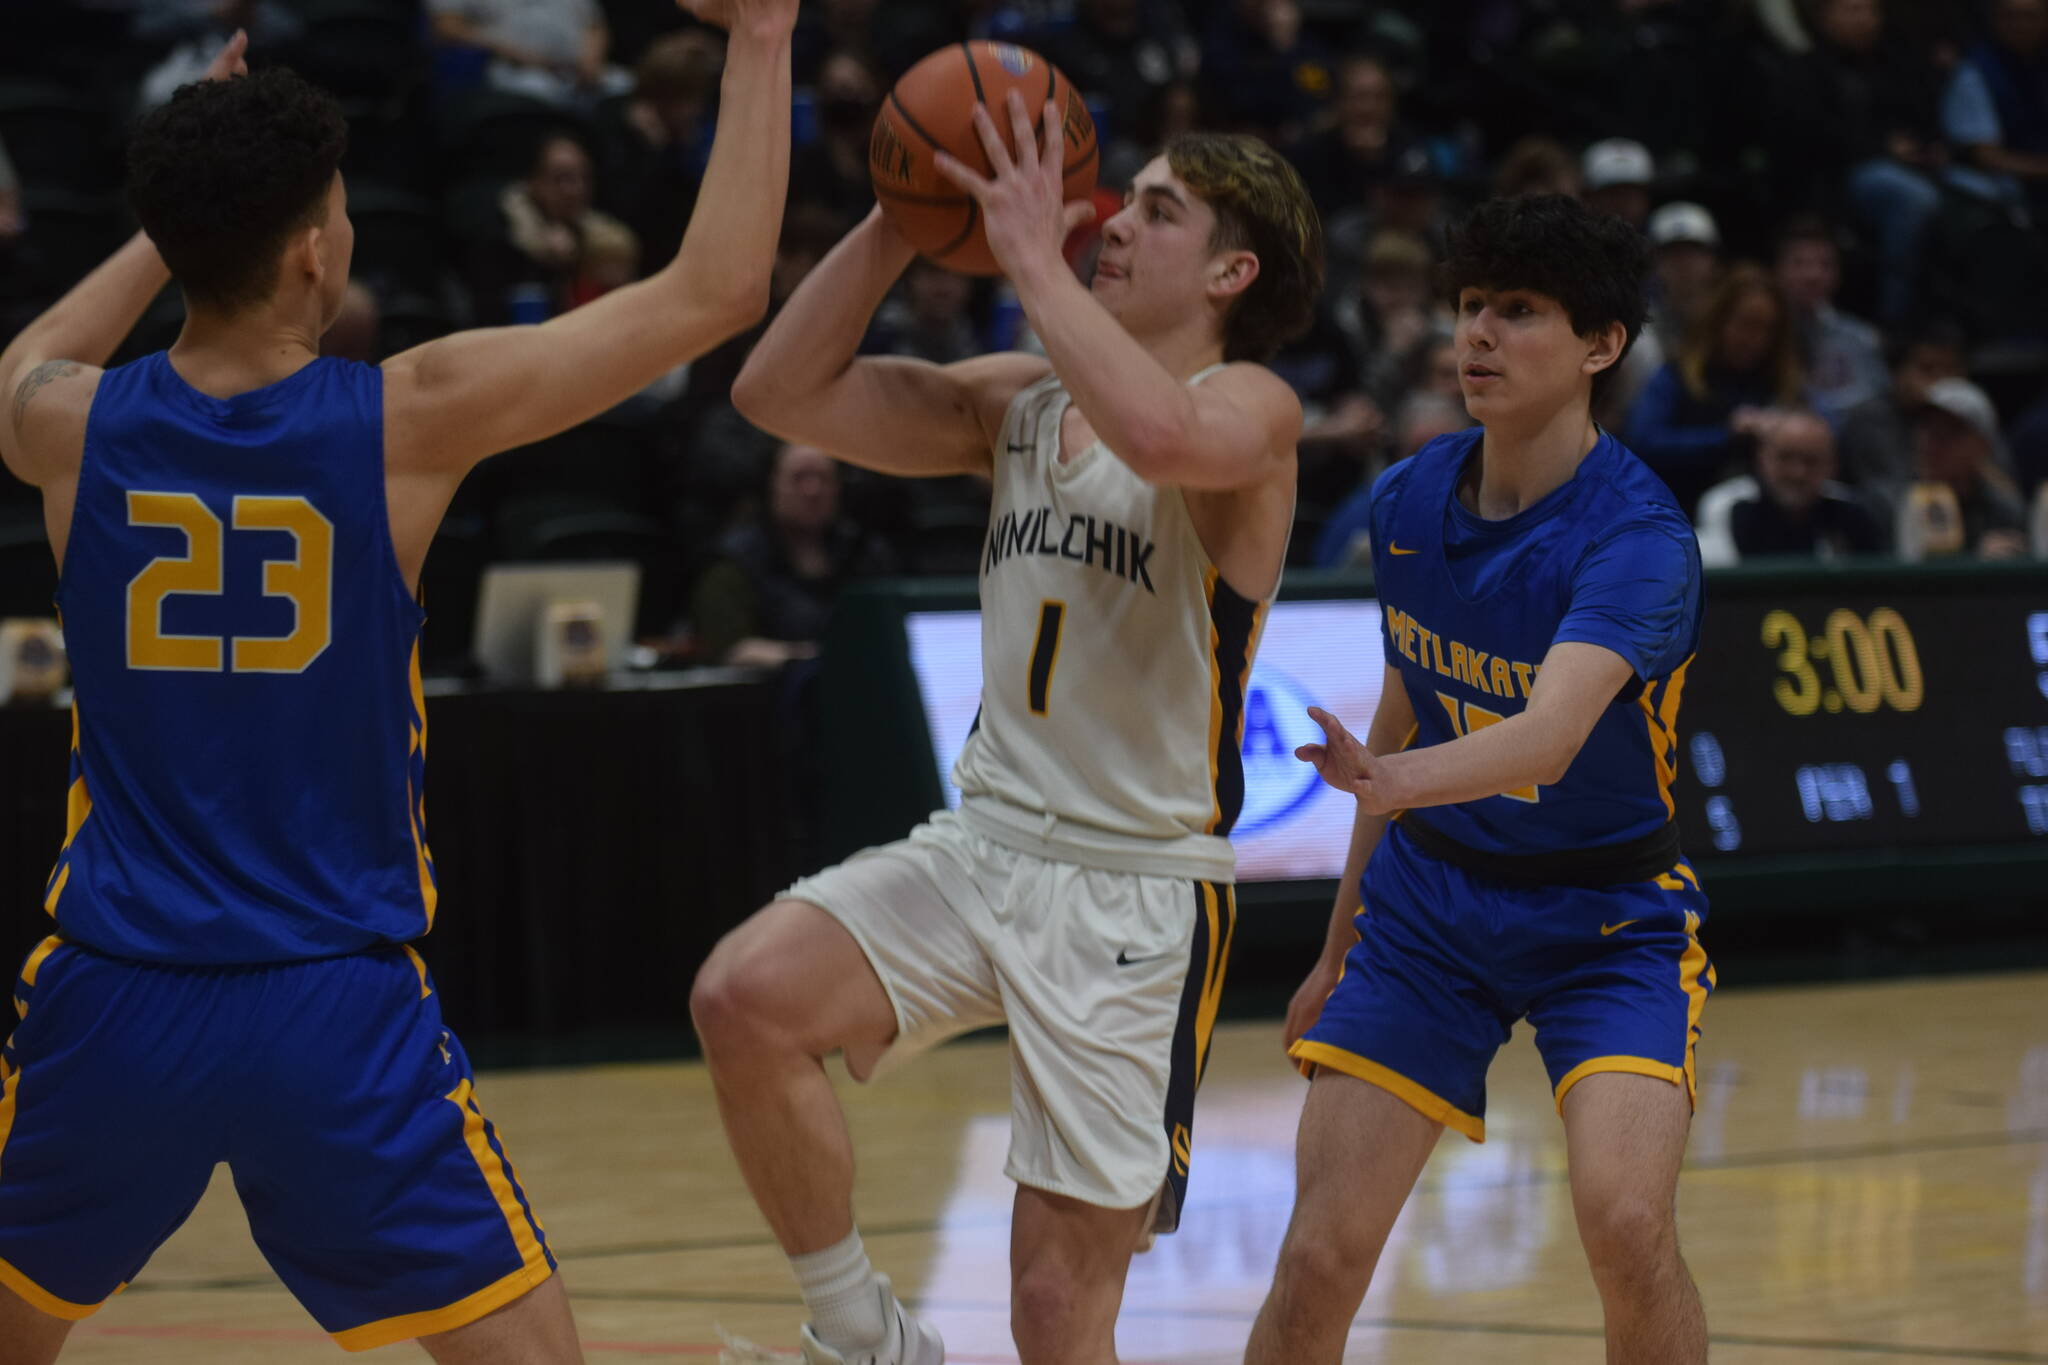 Landon Colburn takes a shot against Metlakatla’s Shayne Anderson during the 2A state basketball championship game at the Alaska Airlines Center in Anchorage, Alaska on Saturday, March 19, 2022. (Camille Botello/Peninsula Clarion)